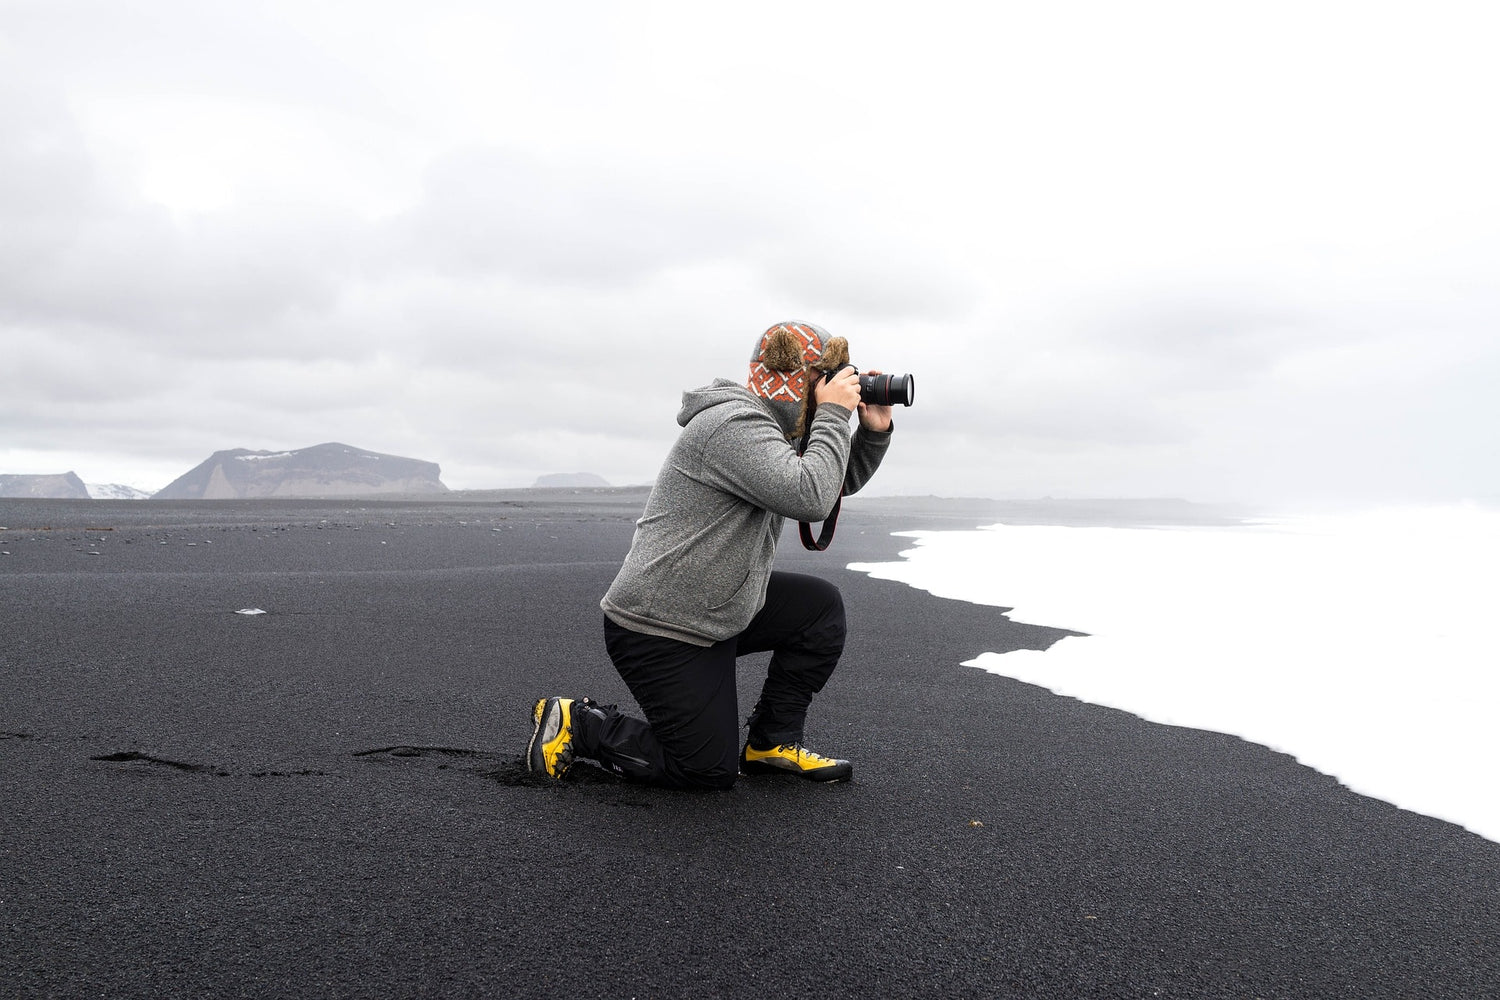 8 Important Ways to Be a Better Photographer